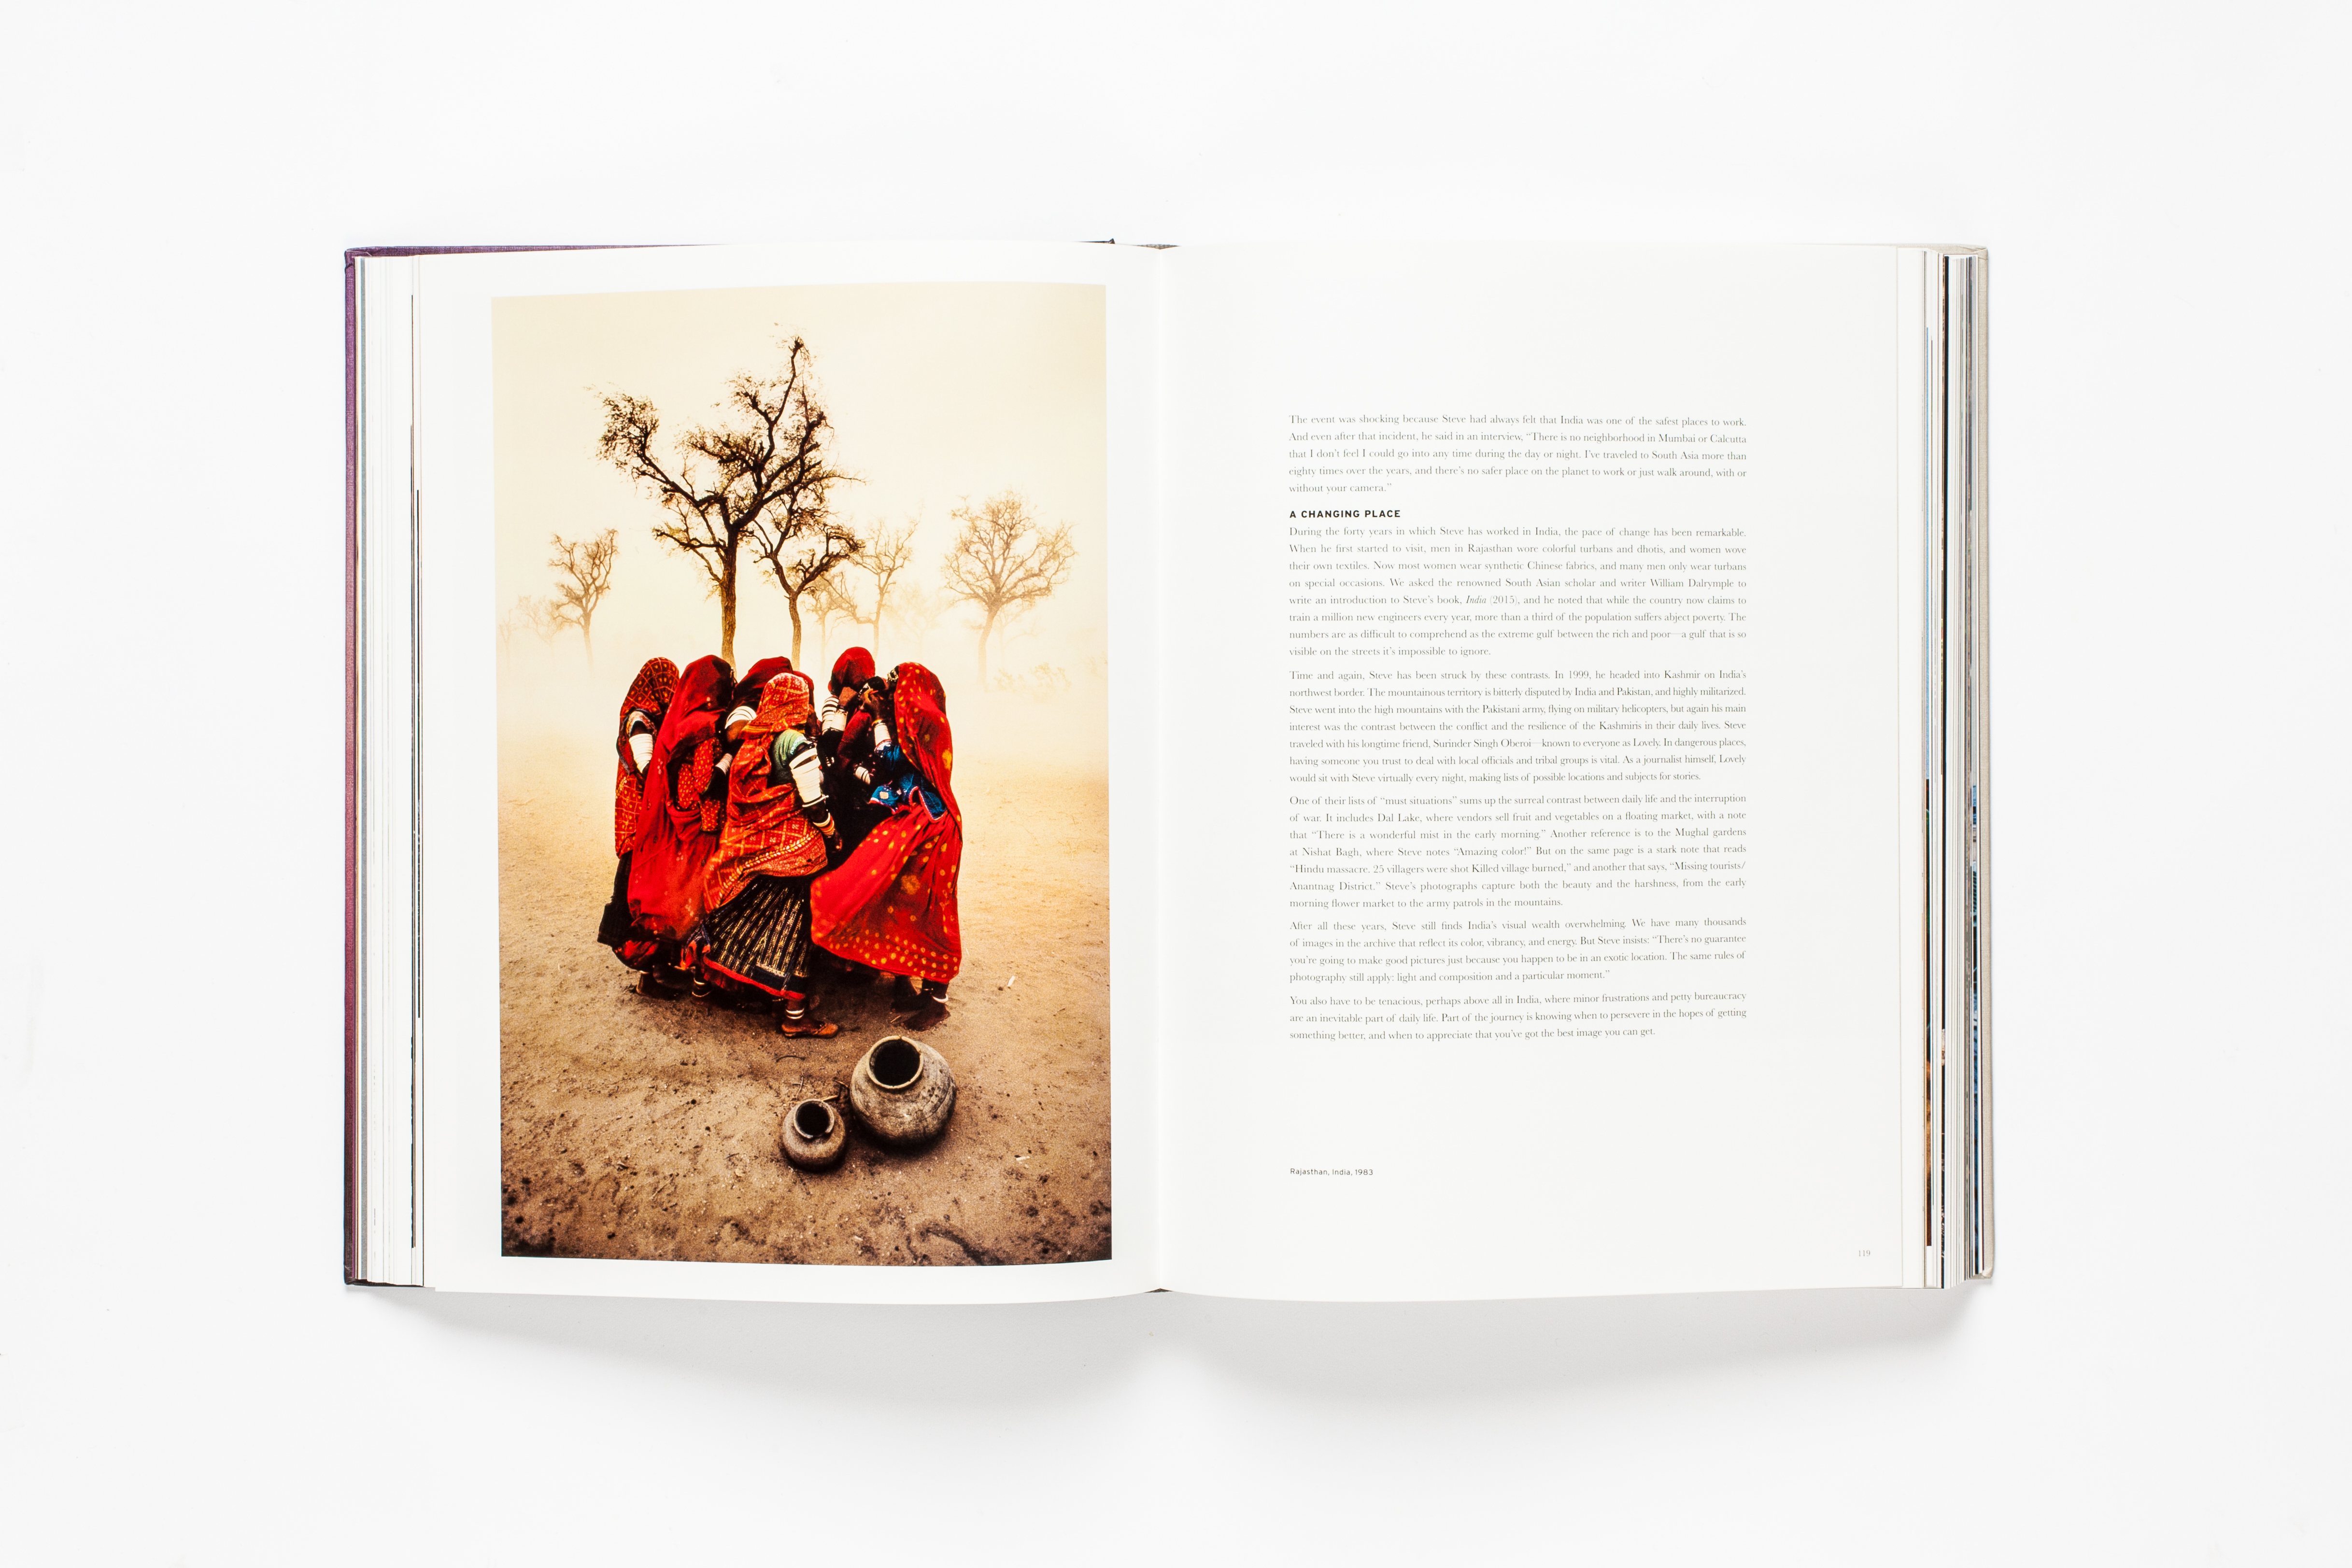 From Steve McCurry: a Life in Pictures. Courtesy of Laurence King Publishing.